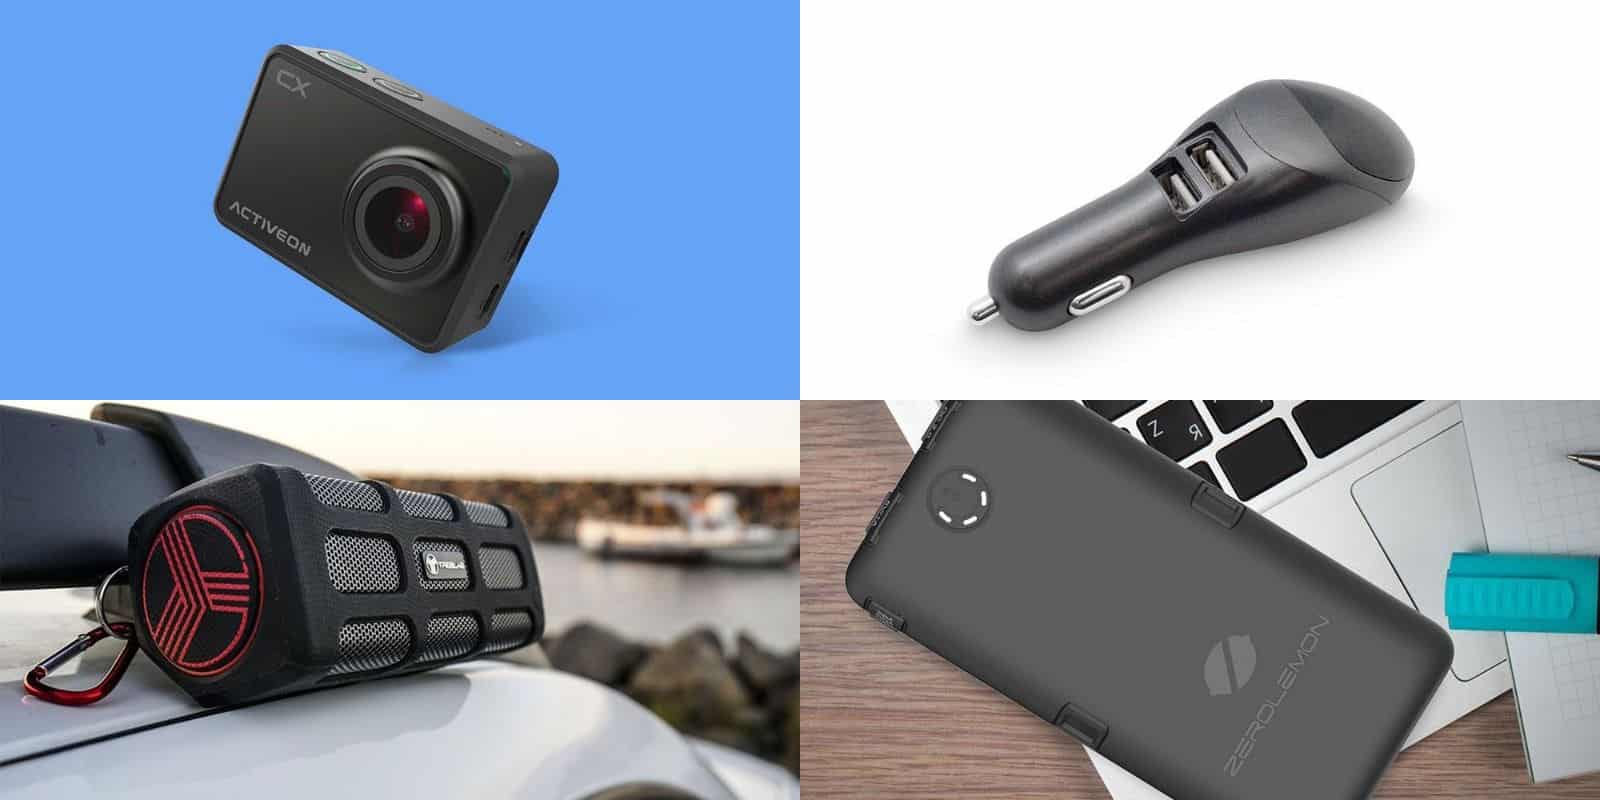 We've rounded up the best deals on gear and gadgets, from portable speakers to battery packs, cameras, and more.